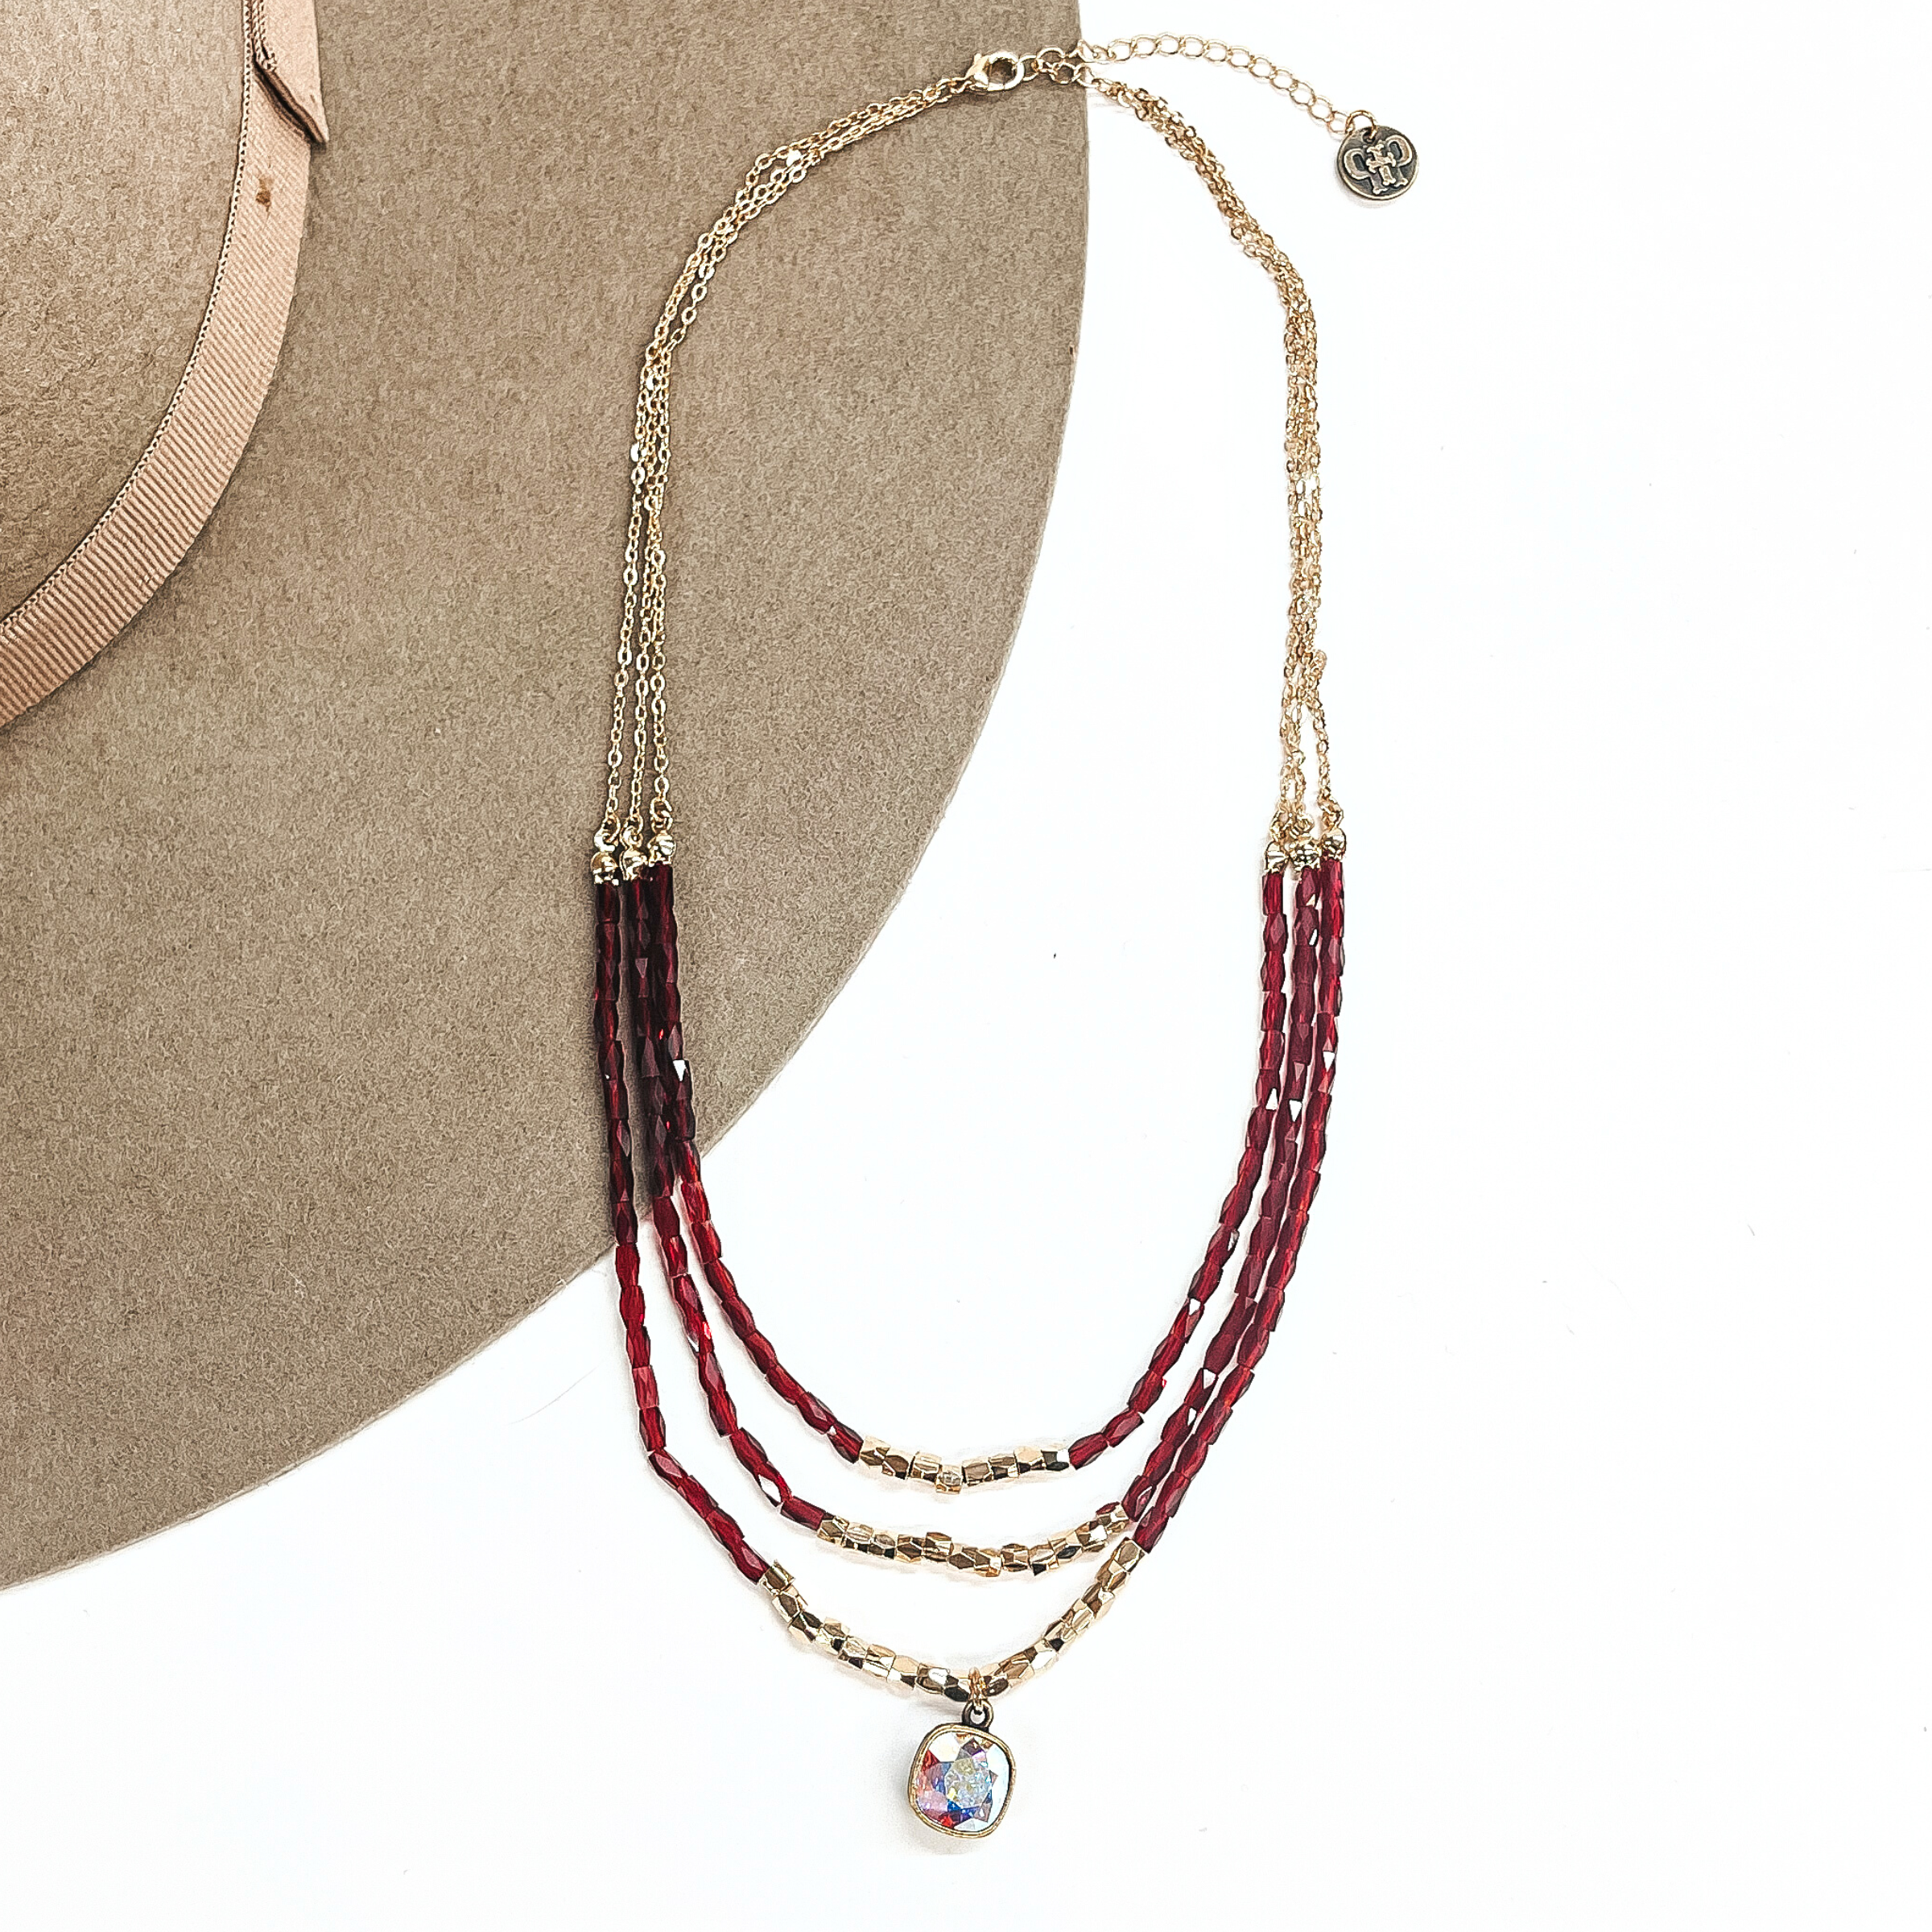 This is a three strand gold necklace with long burgundy beads in the bottom with gold tone beads in the bottom center of each strand. The longest strand has an ab cushion cut crystal in a gold setting. This necklace is taken on a light brown felt hat and on a white background.